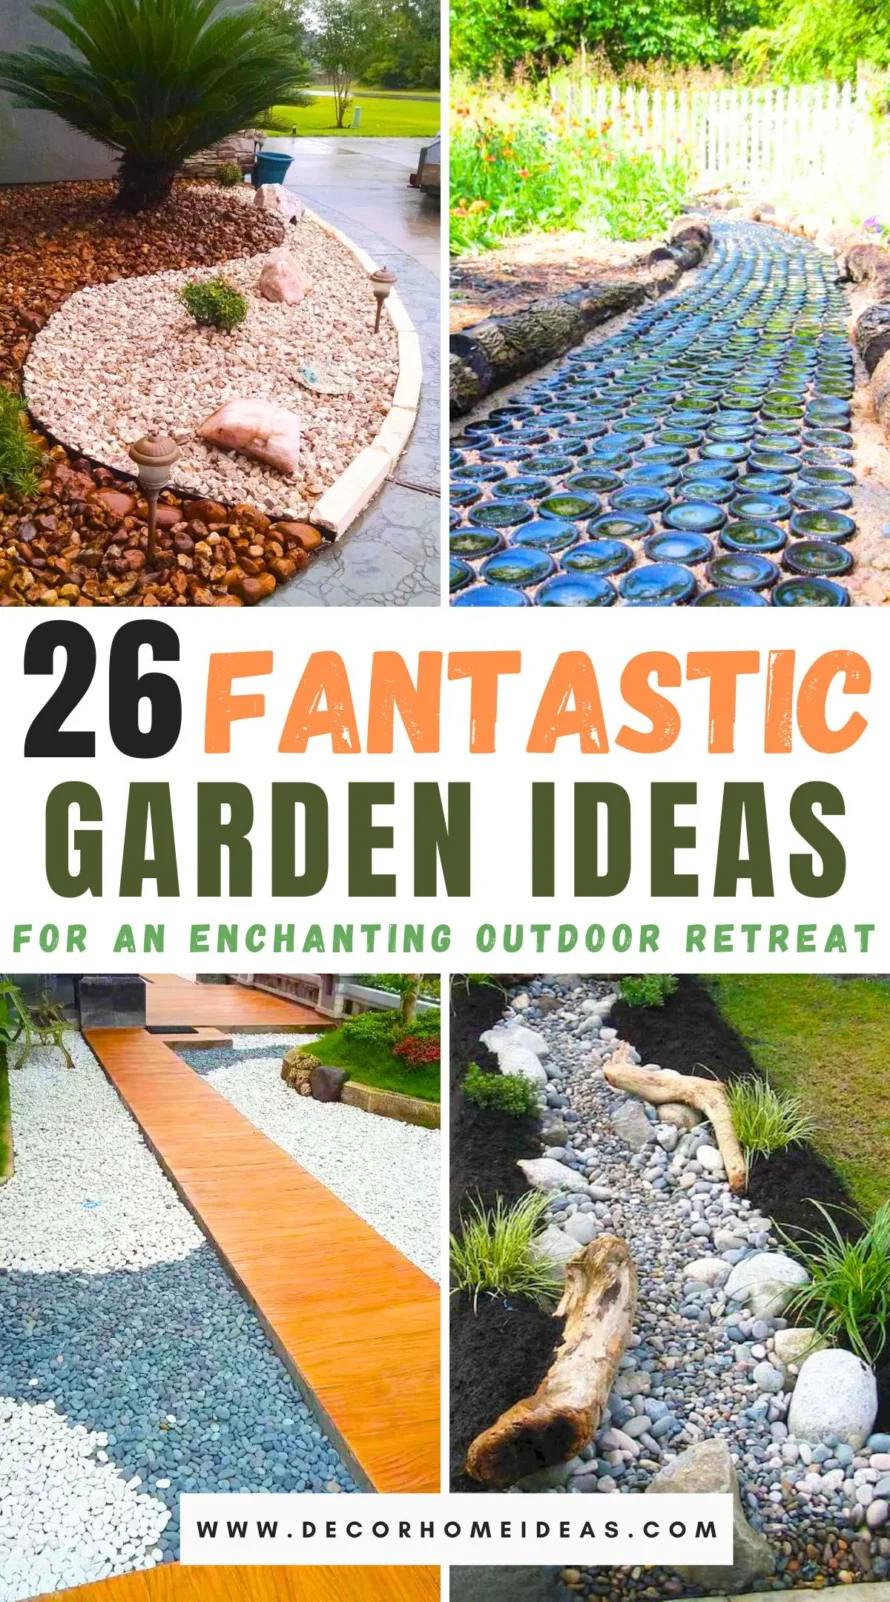 Discover 22 alluring garden ideas to elevate your outdoor experience. From tranquil Zen gardens to vibrant floral displays, these captivating designs offer endless inspiration for creating a breathtaking outdoor retreat that beckons relaxation and rejuvenation.